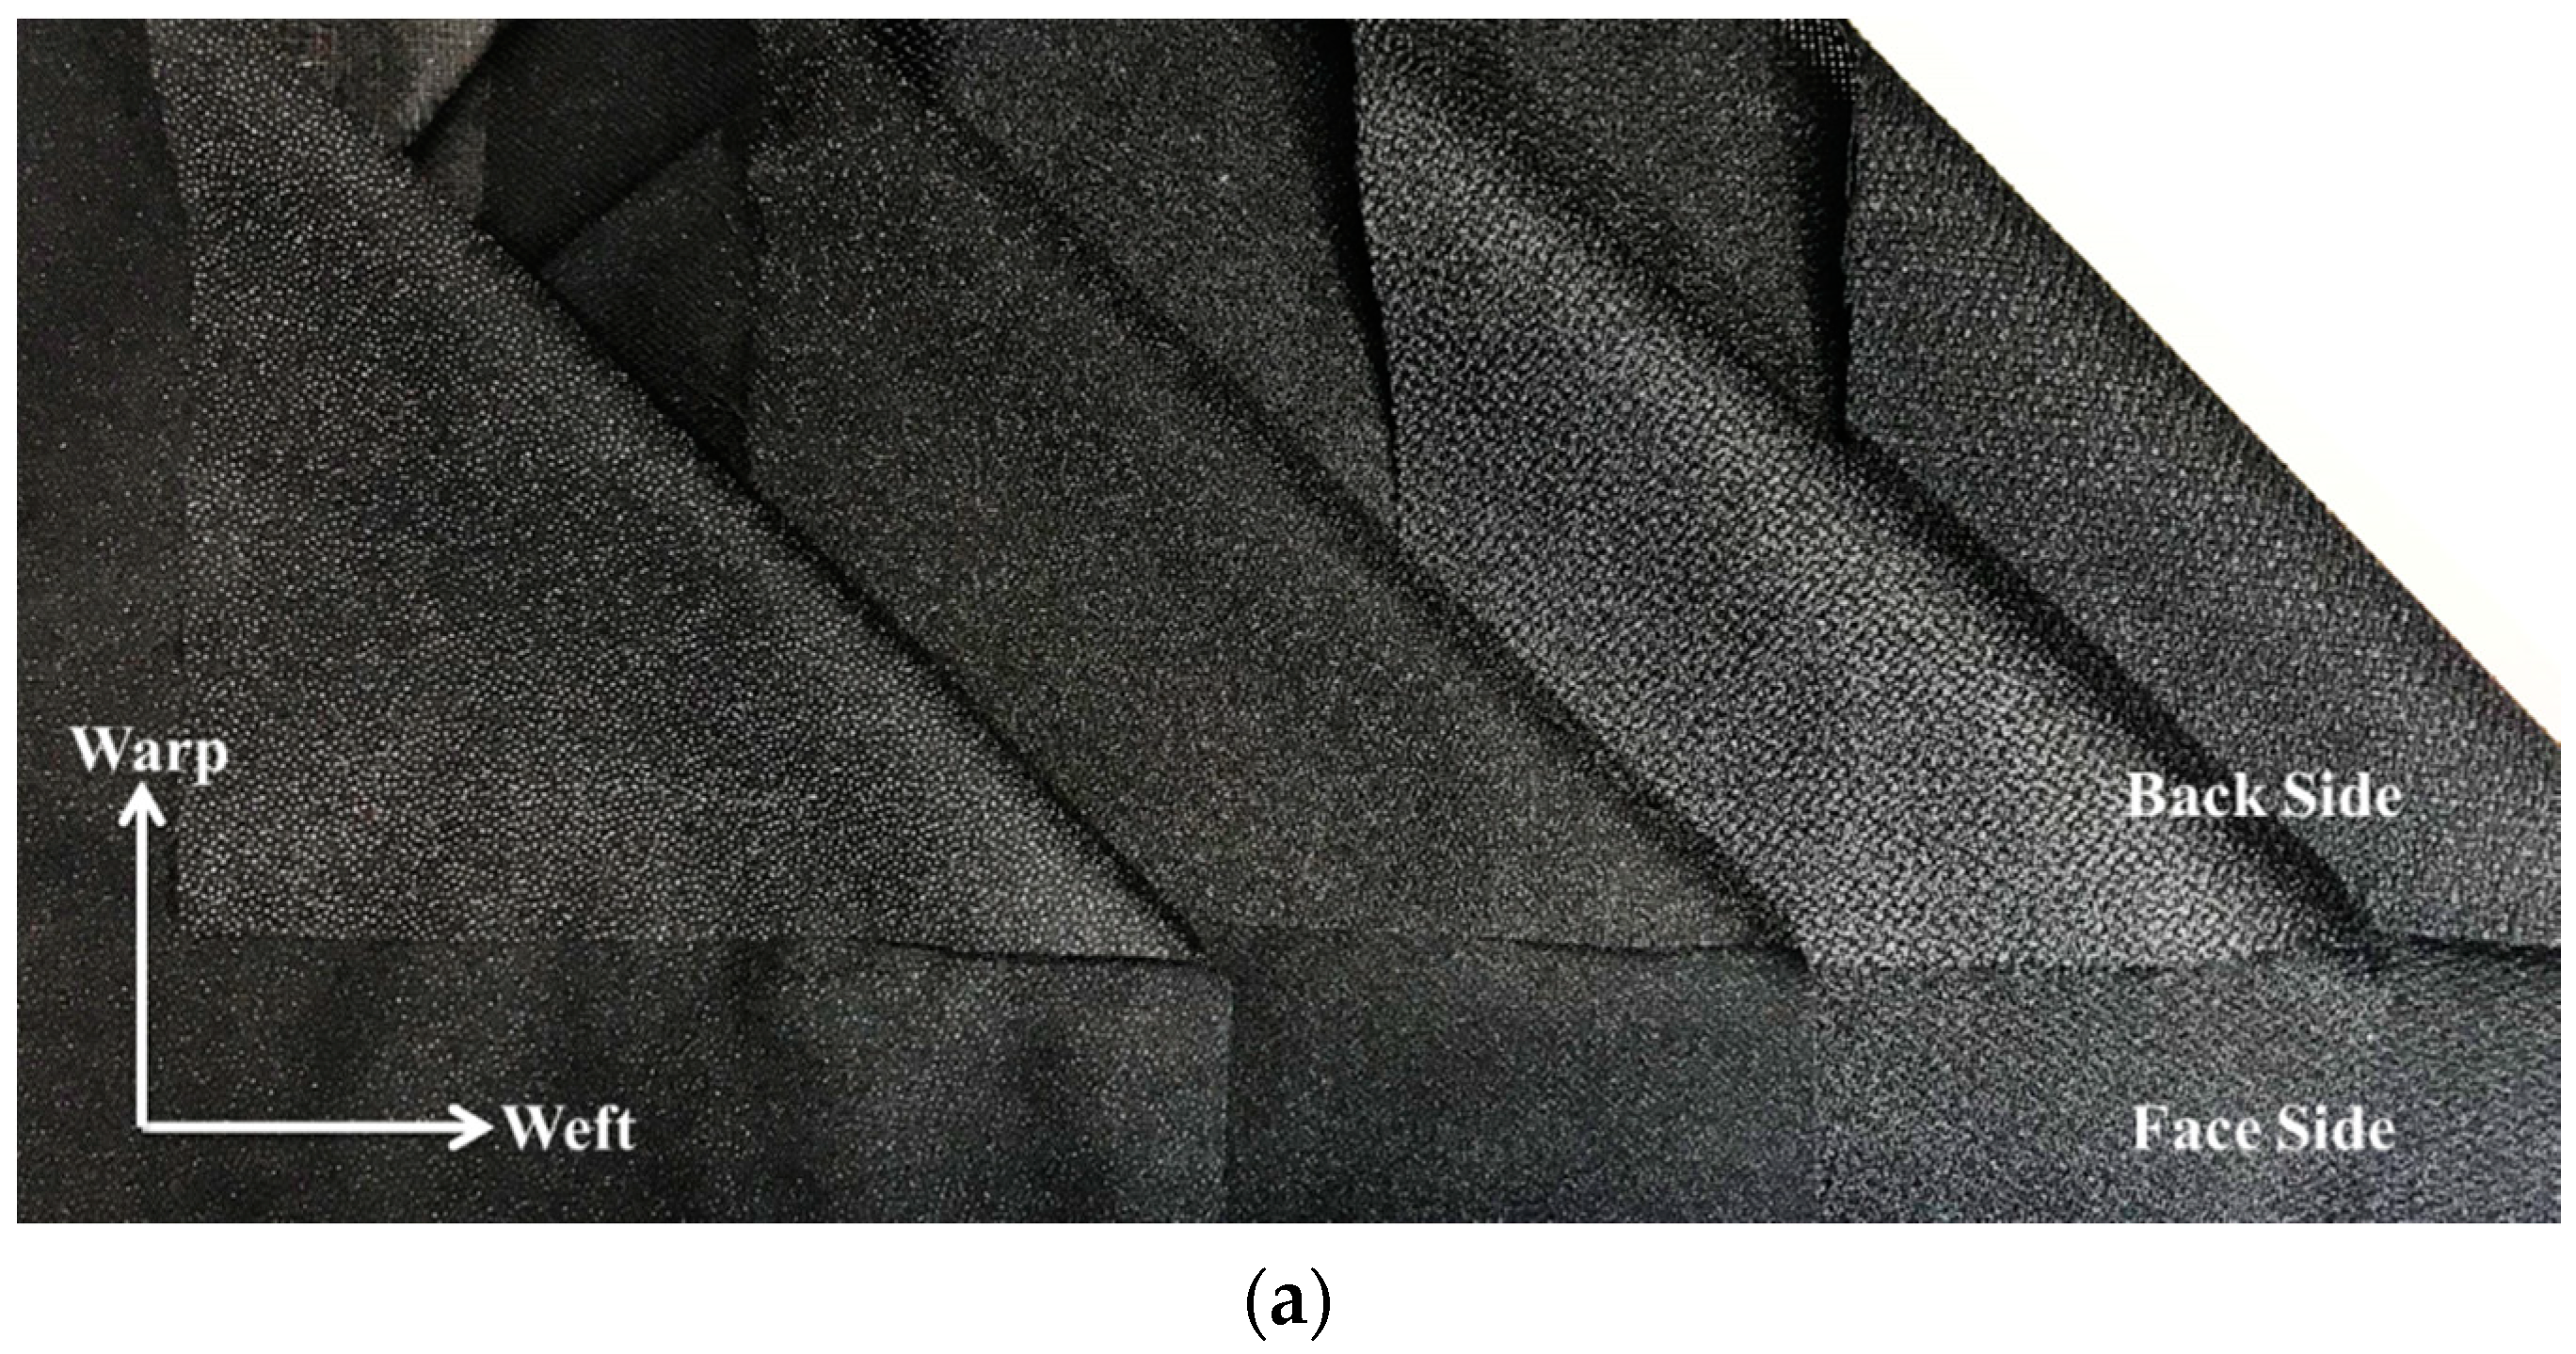 Polymers | Free Full-Text | A Review of Fusible Interlinings Usage in  Garment Manufacture